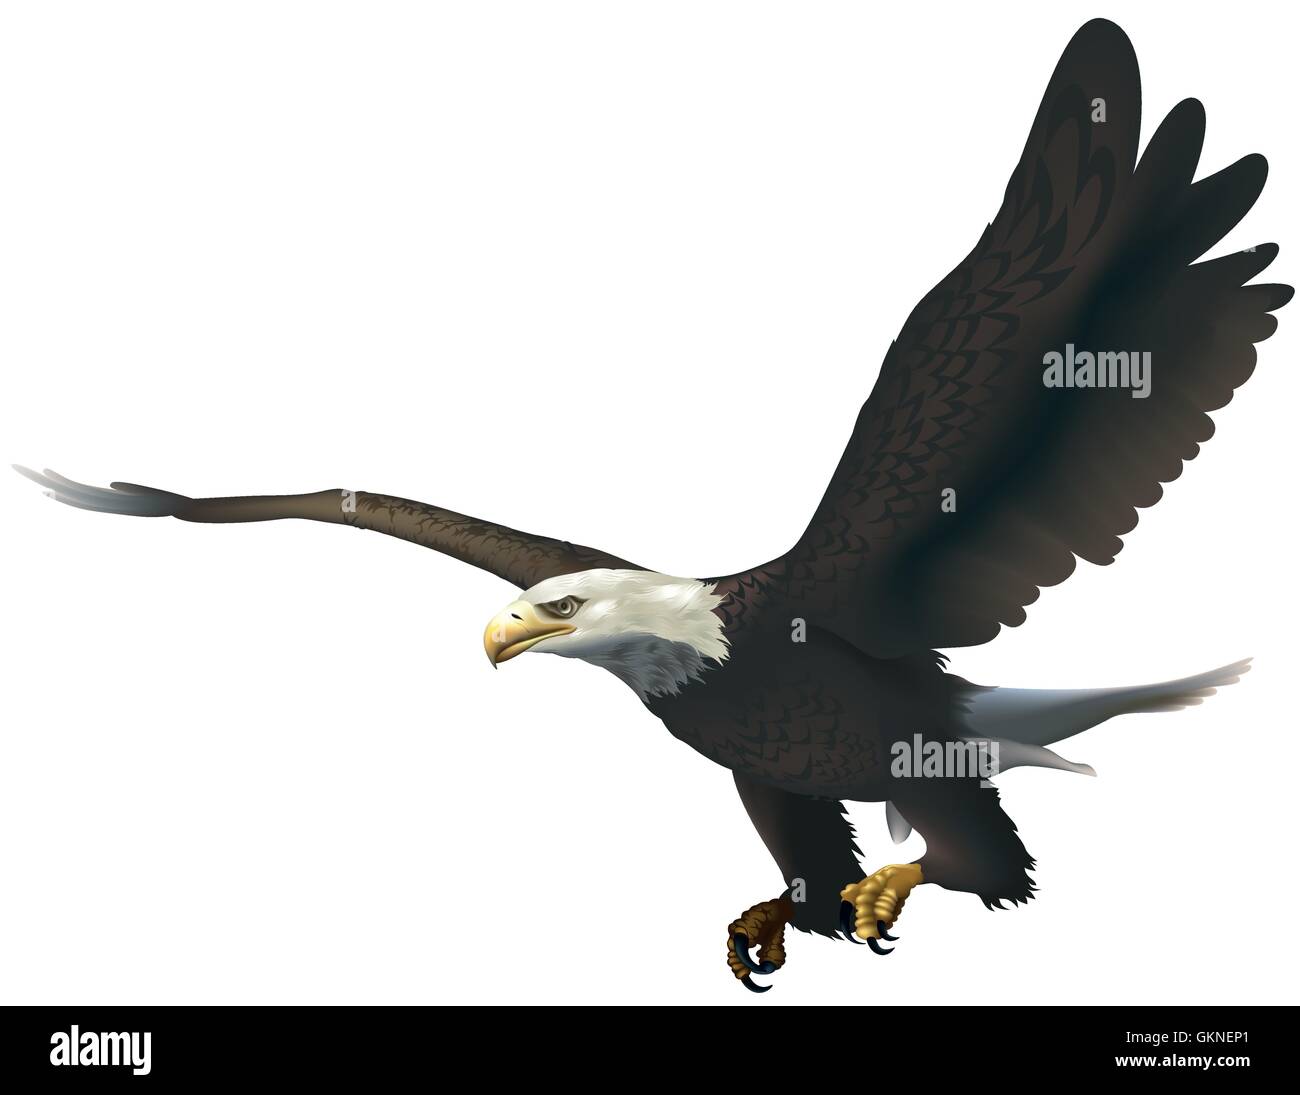 854 Fish Eagle Drawing Images, Stock Photos & Vectors | Shutterstock